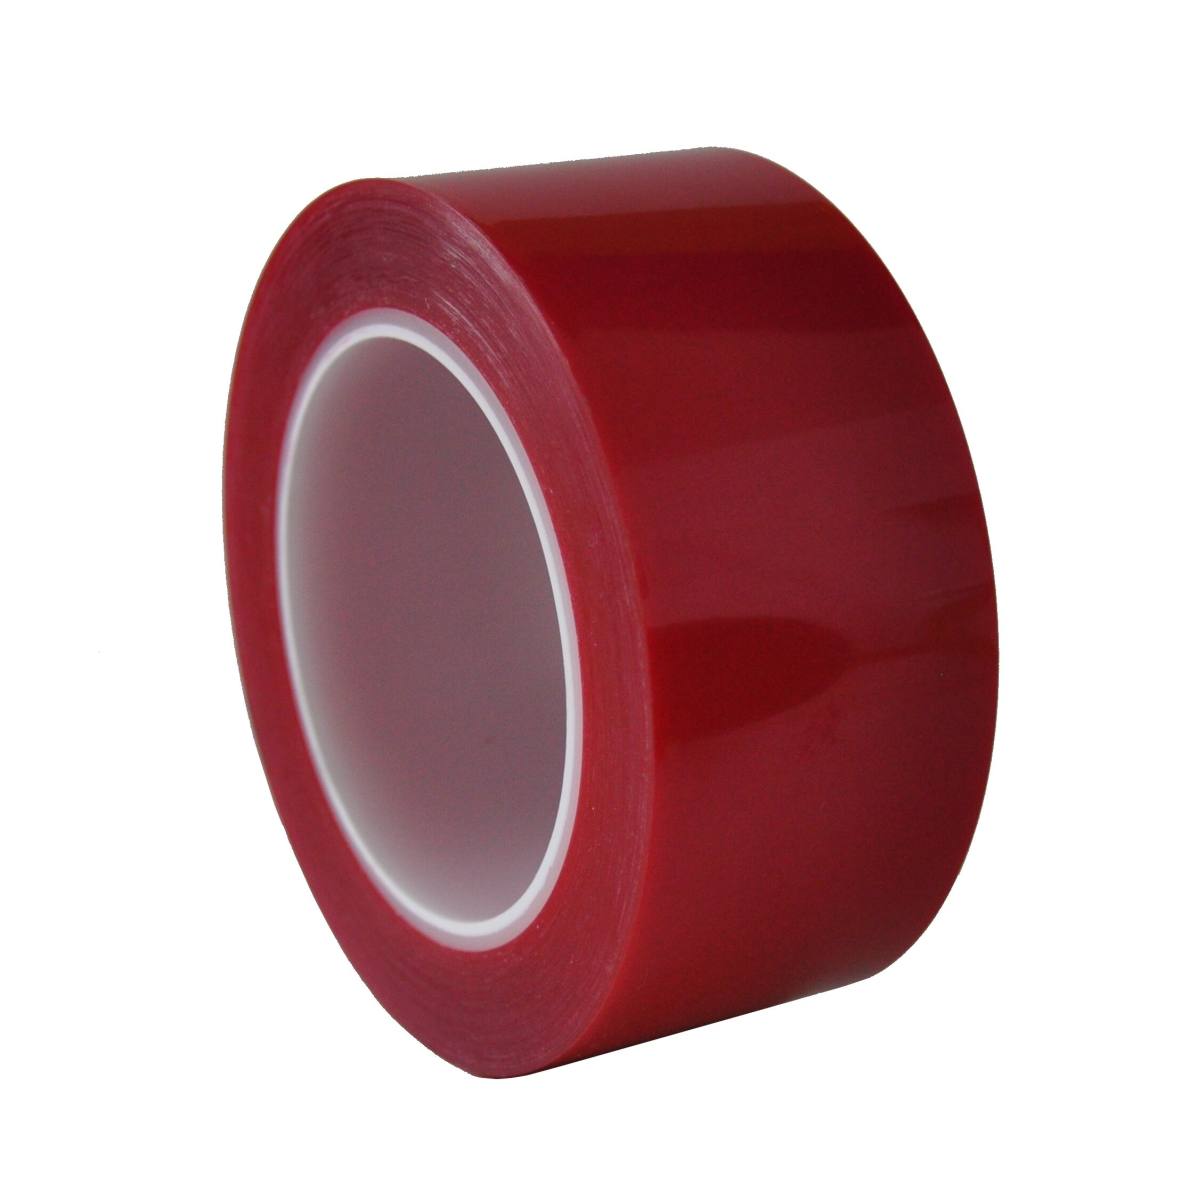 S-K-S 208R polyester plakband, 12mmx66m, rood